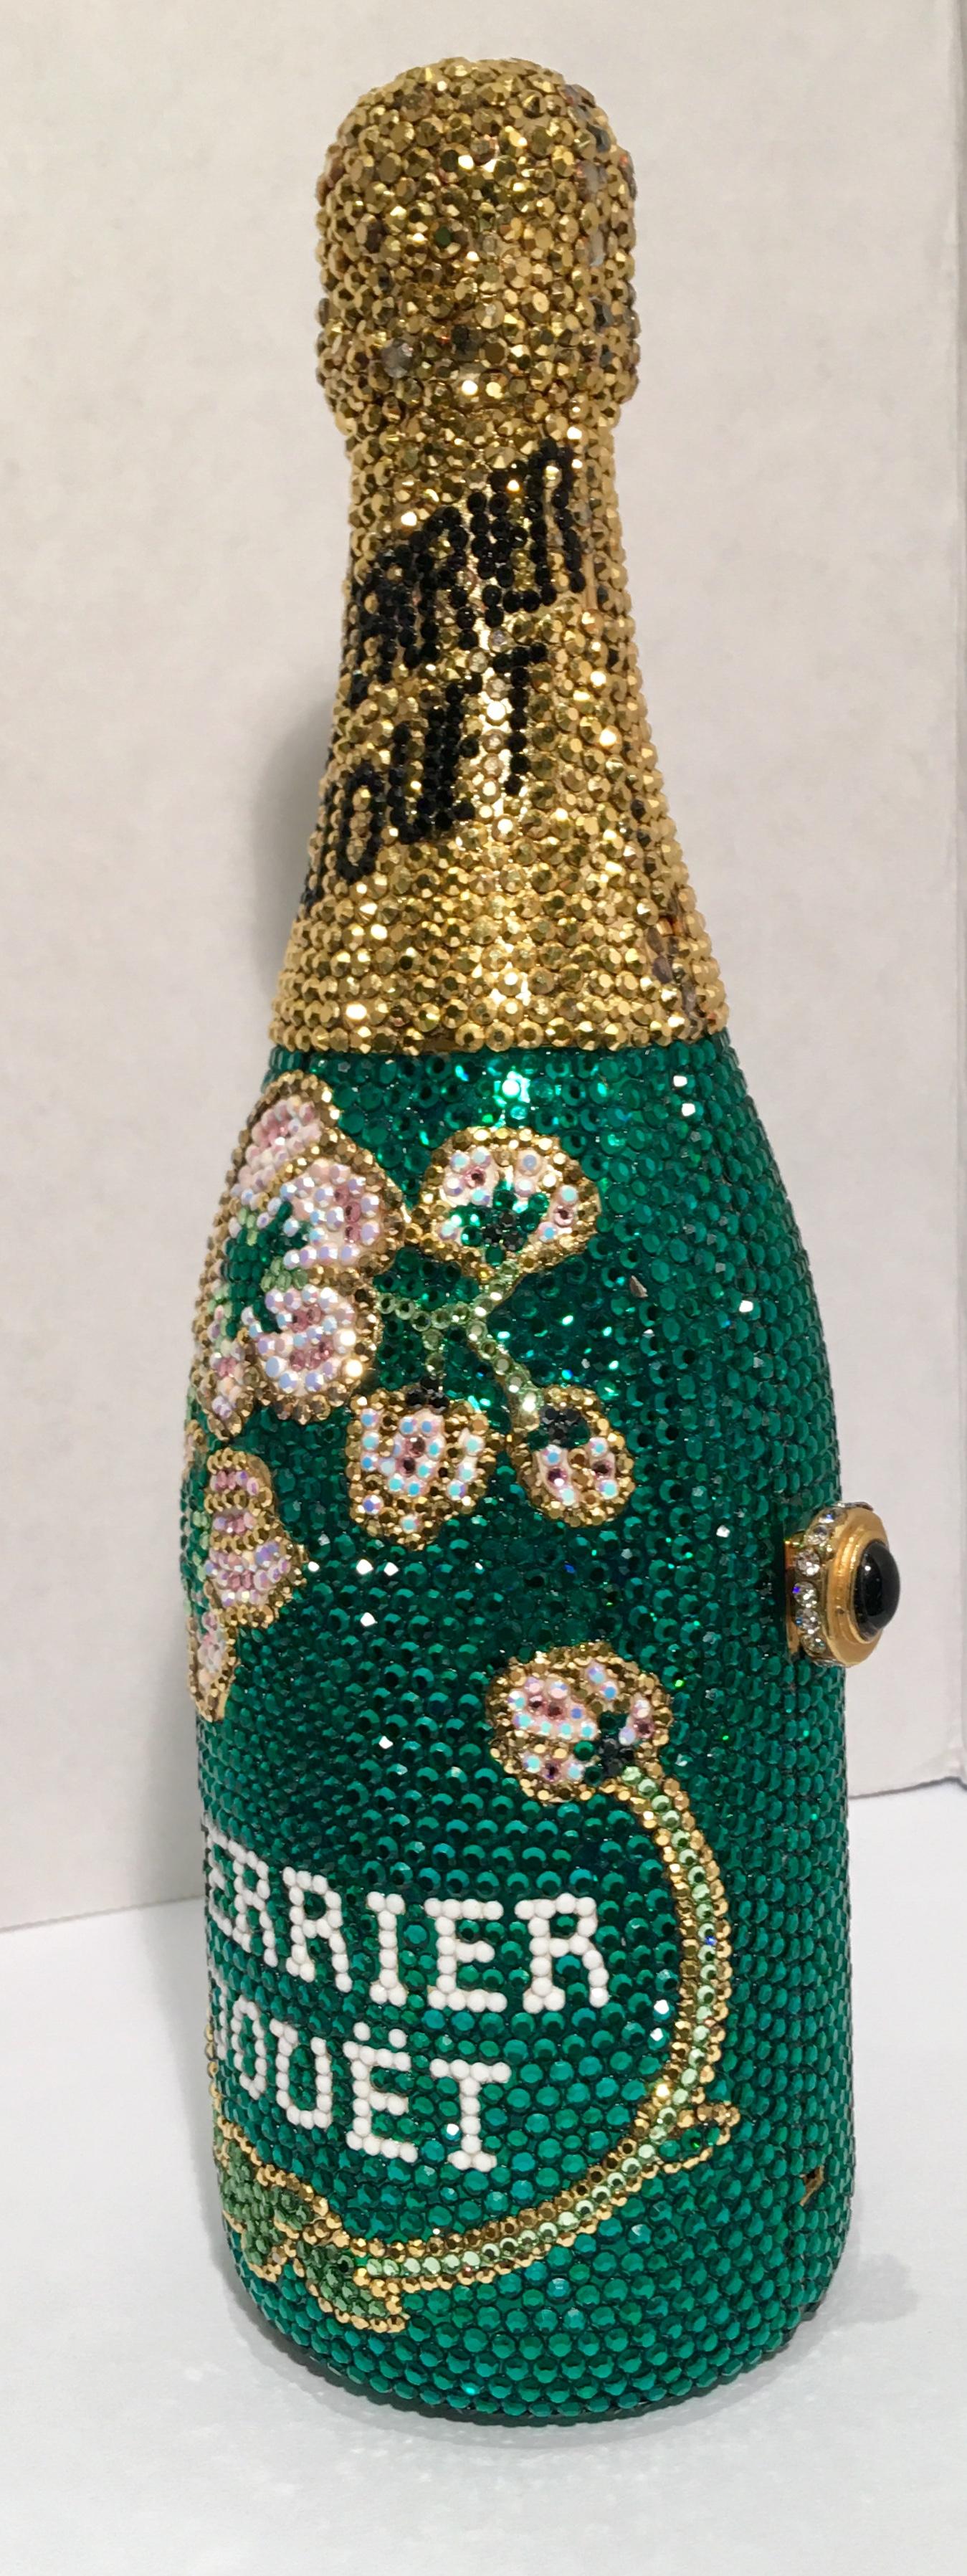 A limited-edition, signed and numbered, Swarovski crystal encrusted, gold-plated metal Perrier Jouet (Trademarked) French champagne split bottle shaped minaudière evening bag purse by Kathrine Baumann, who is the celebrated handbag maker to the